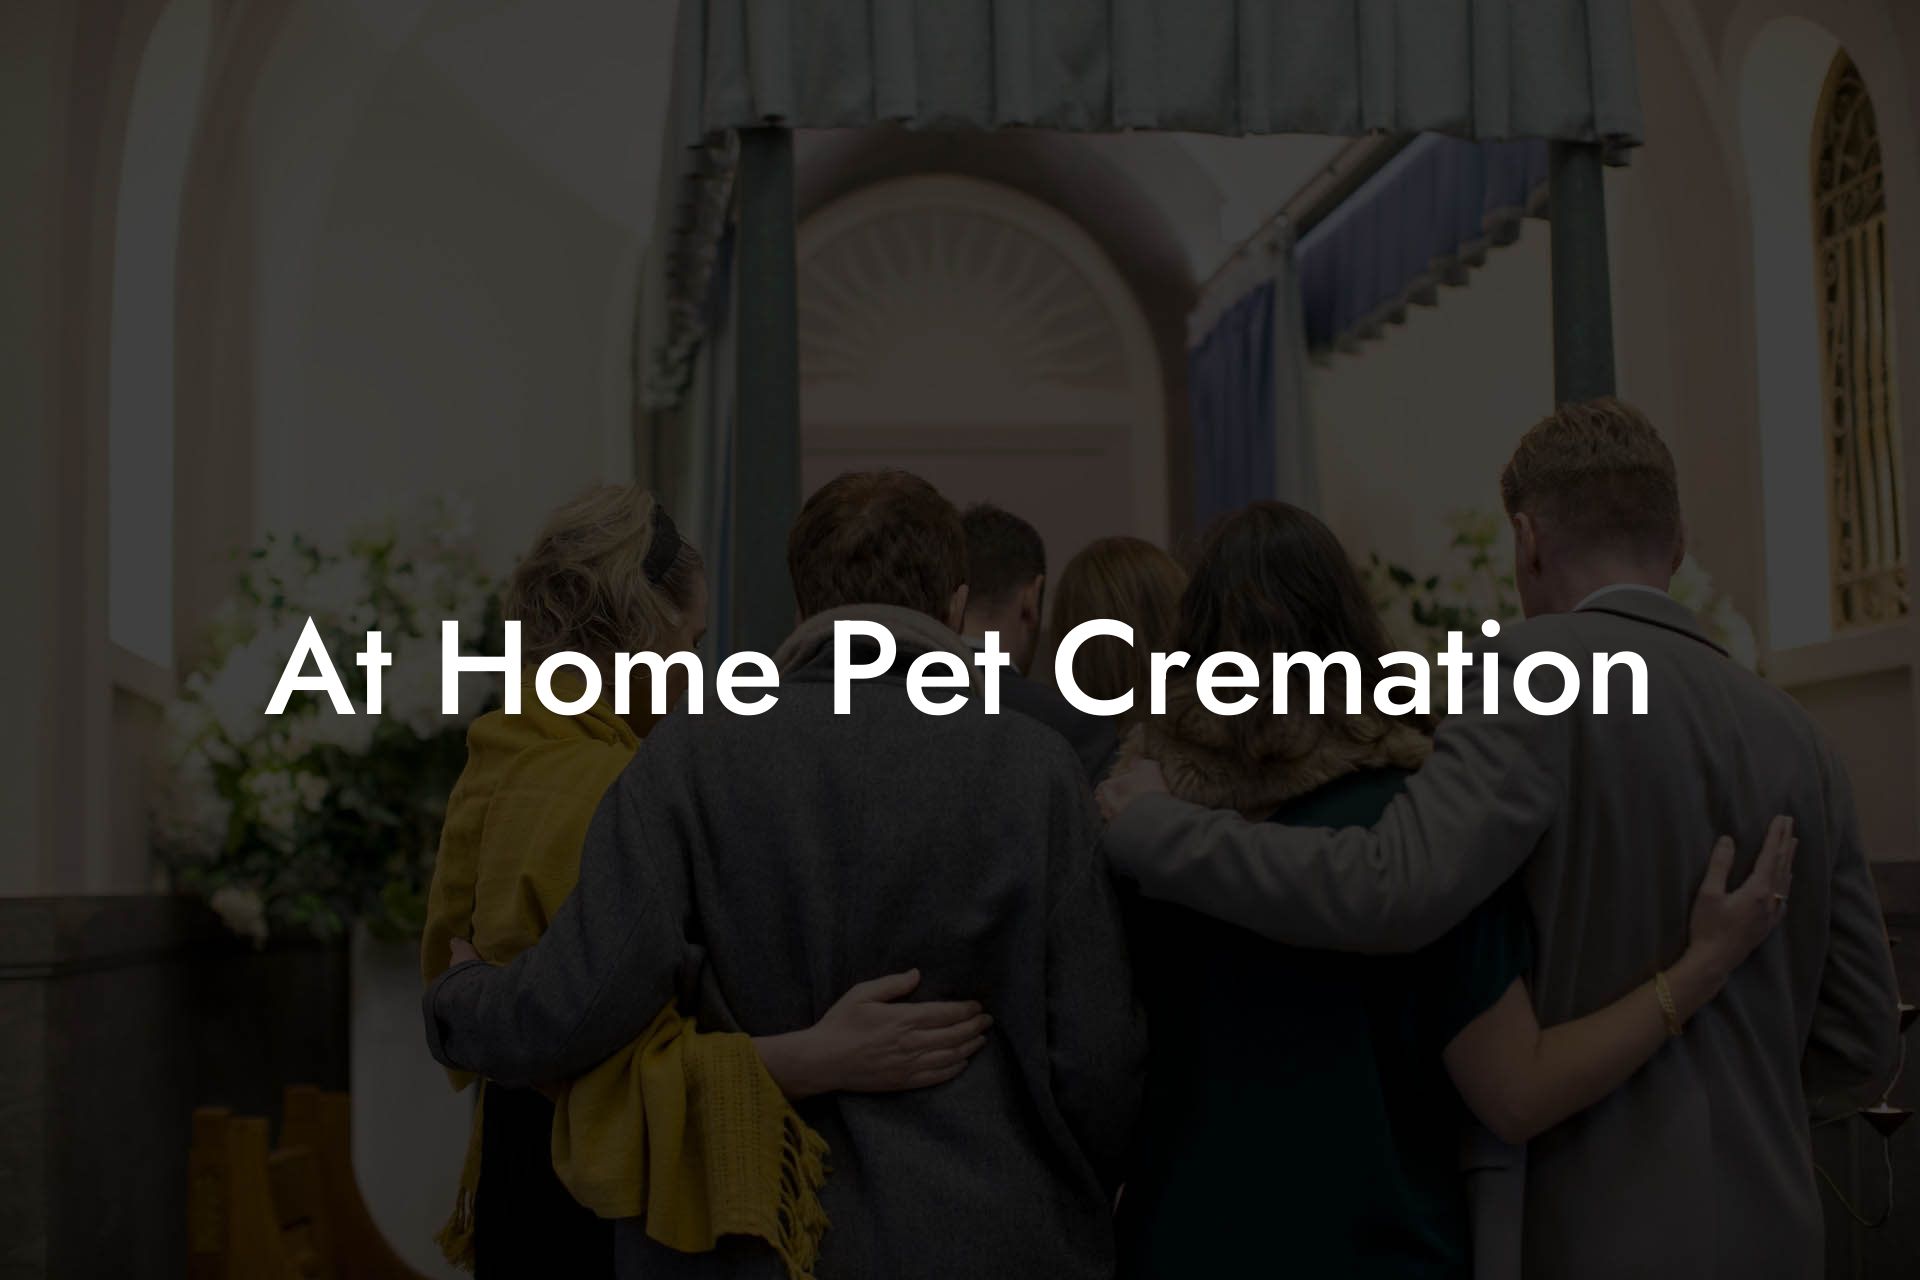 At Home Pet Cremation